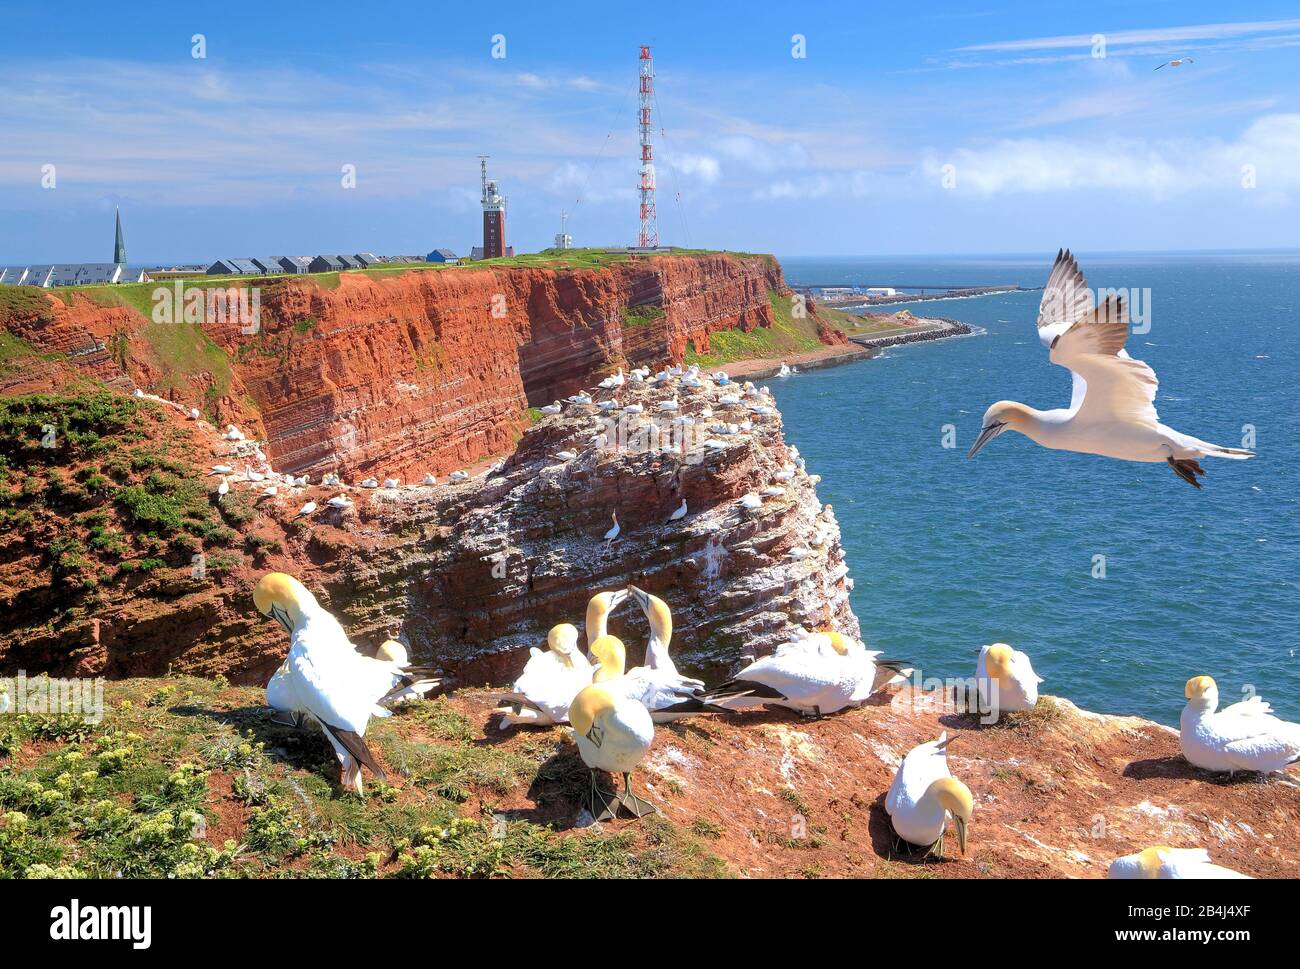 Northwest cliff with breeding seabirds, gannets, lighthouse and mast on the Oberland, Heligoland, Helgoland Bay, German Bight, North Sea island, North Sea, Schleswig-Holstein, Germany Stock Photo